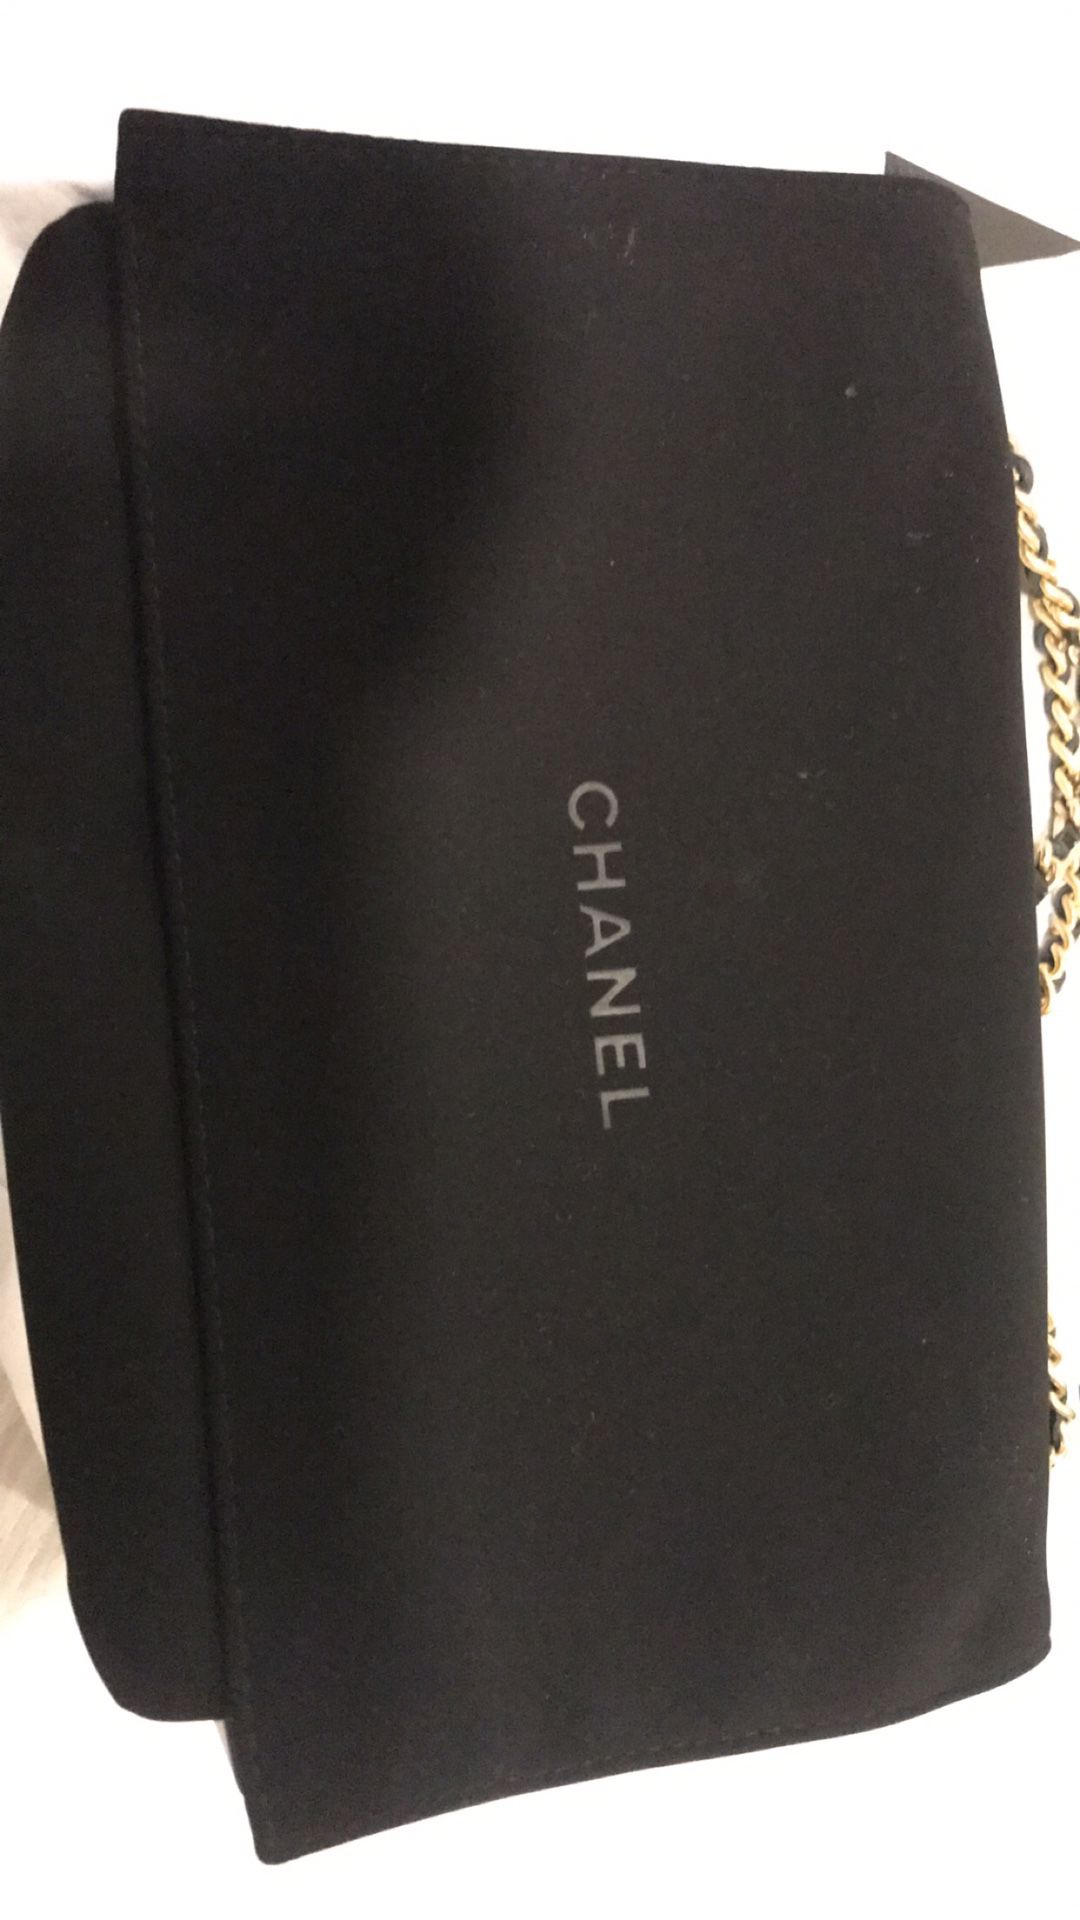 NWT CHANEL Lucky charms woc mini clutch bag wallet on chain